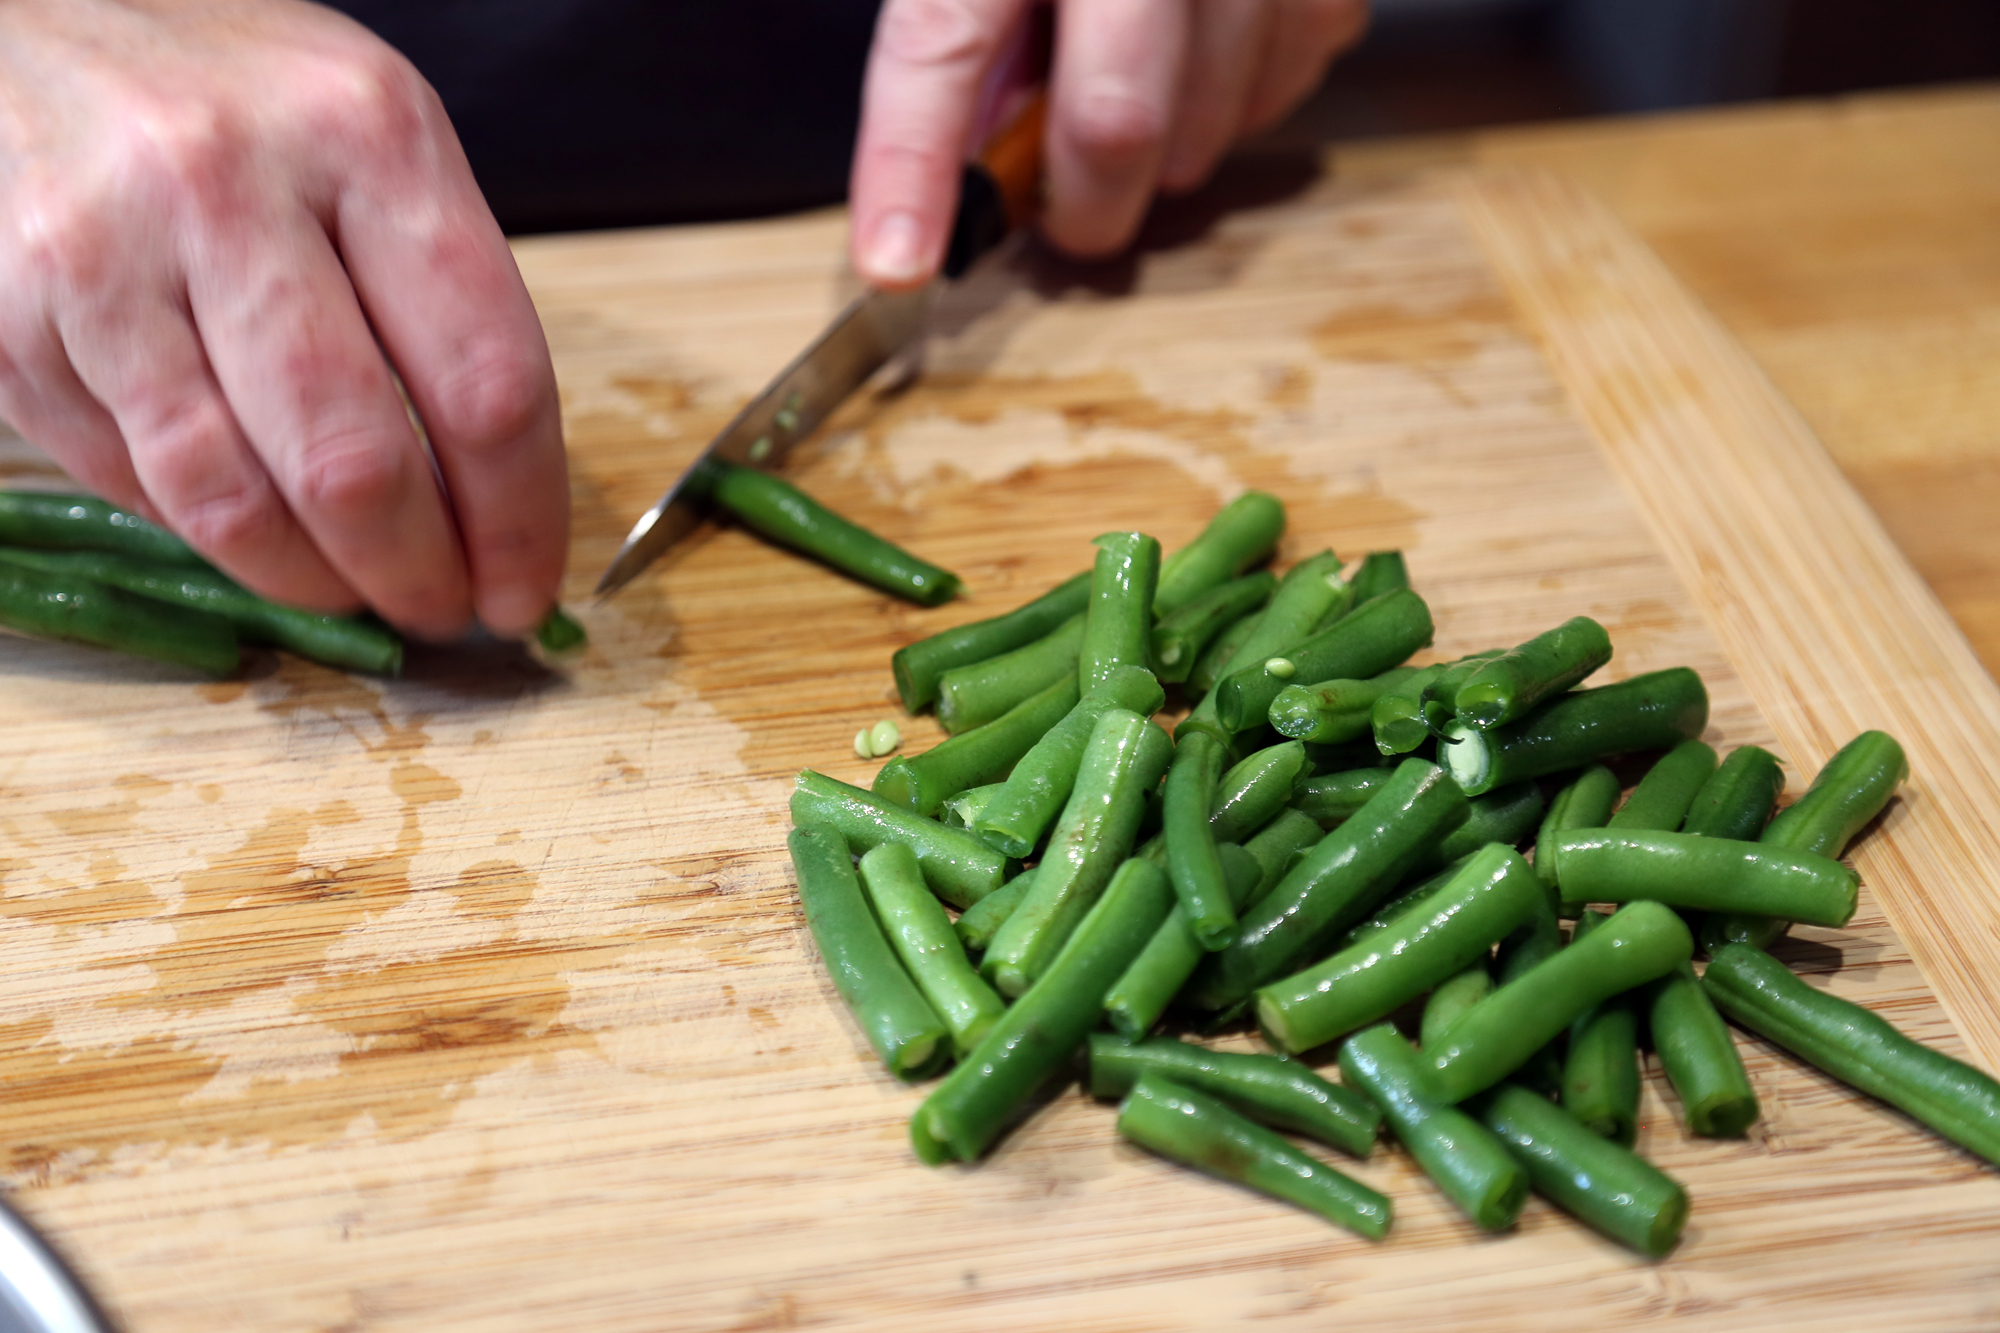 Trim and cut green beans into 1-inch lengths.